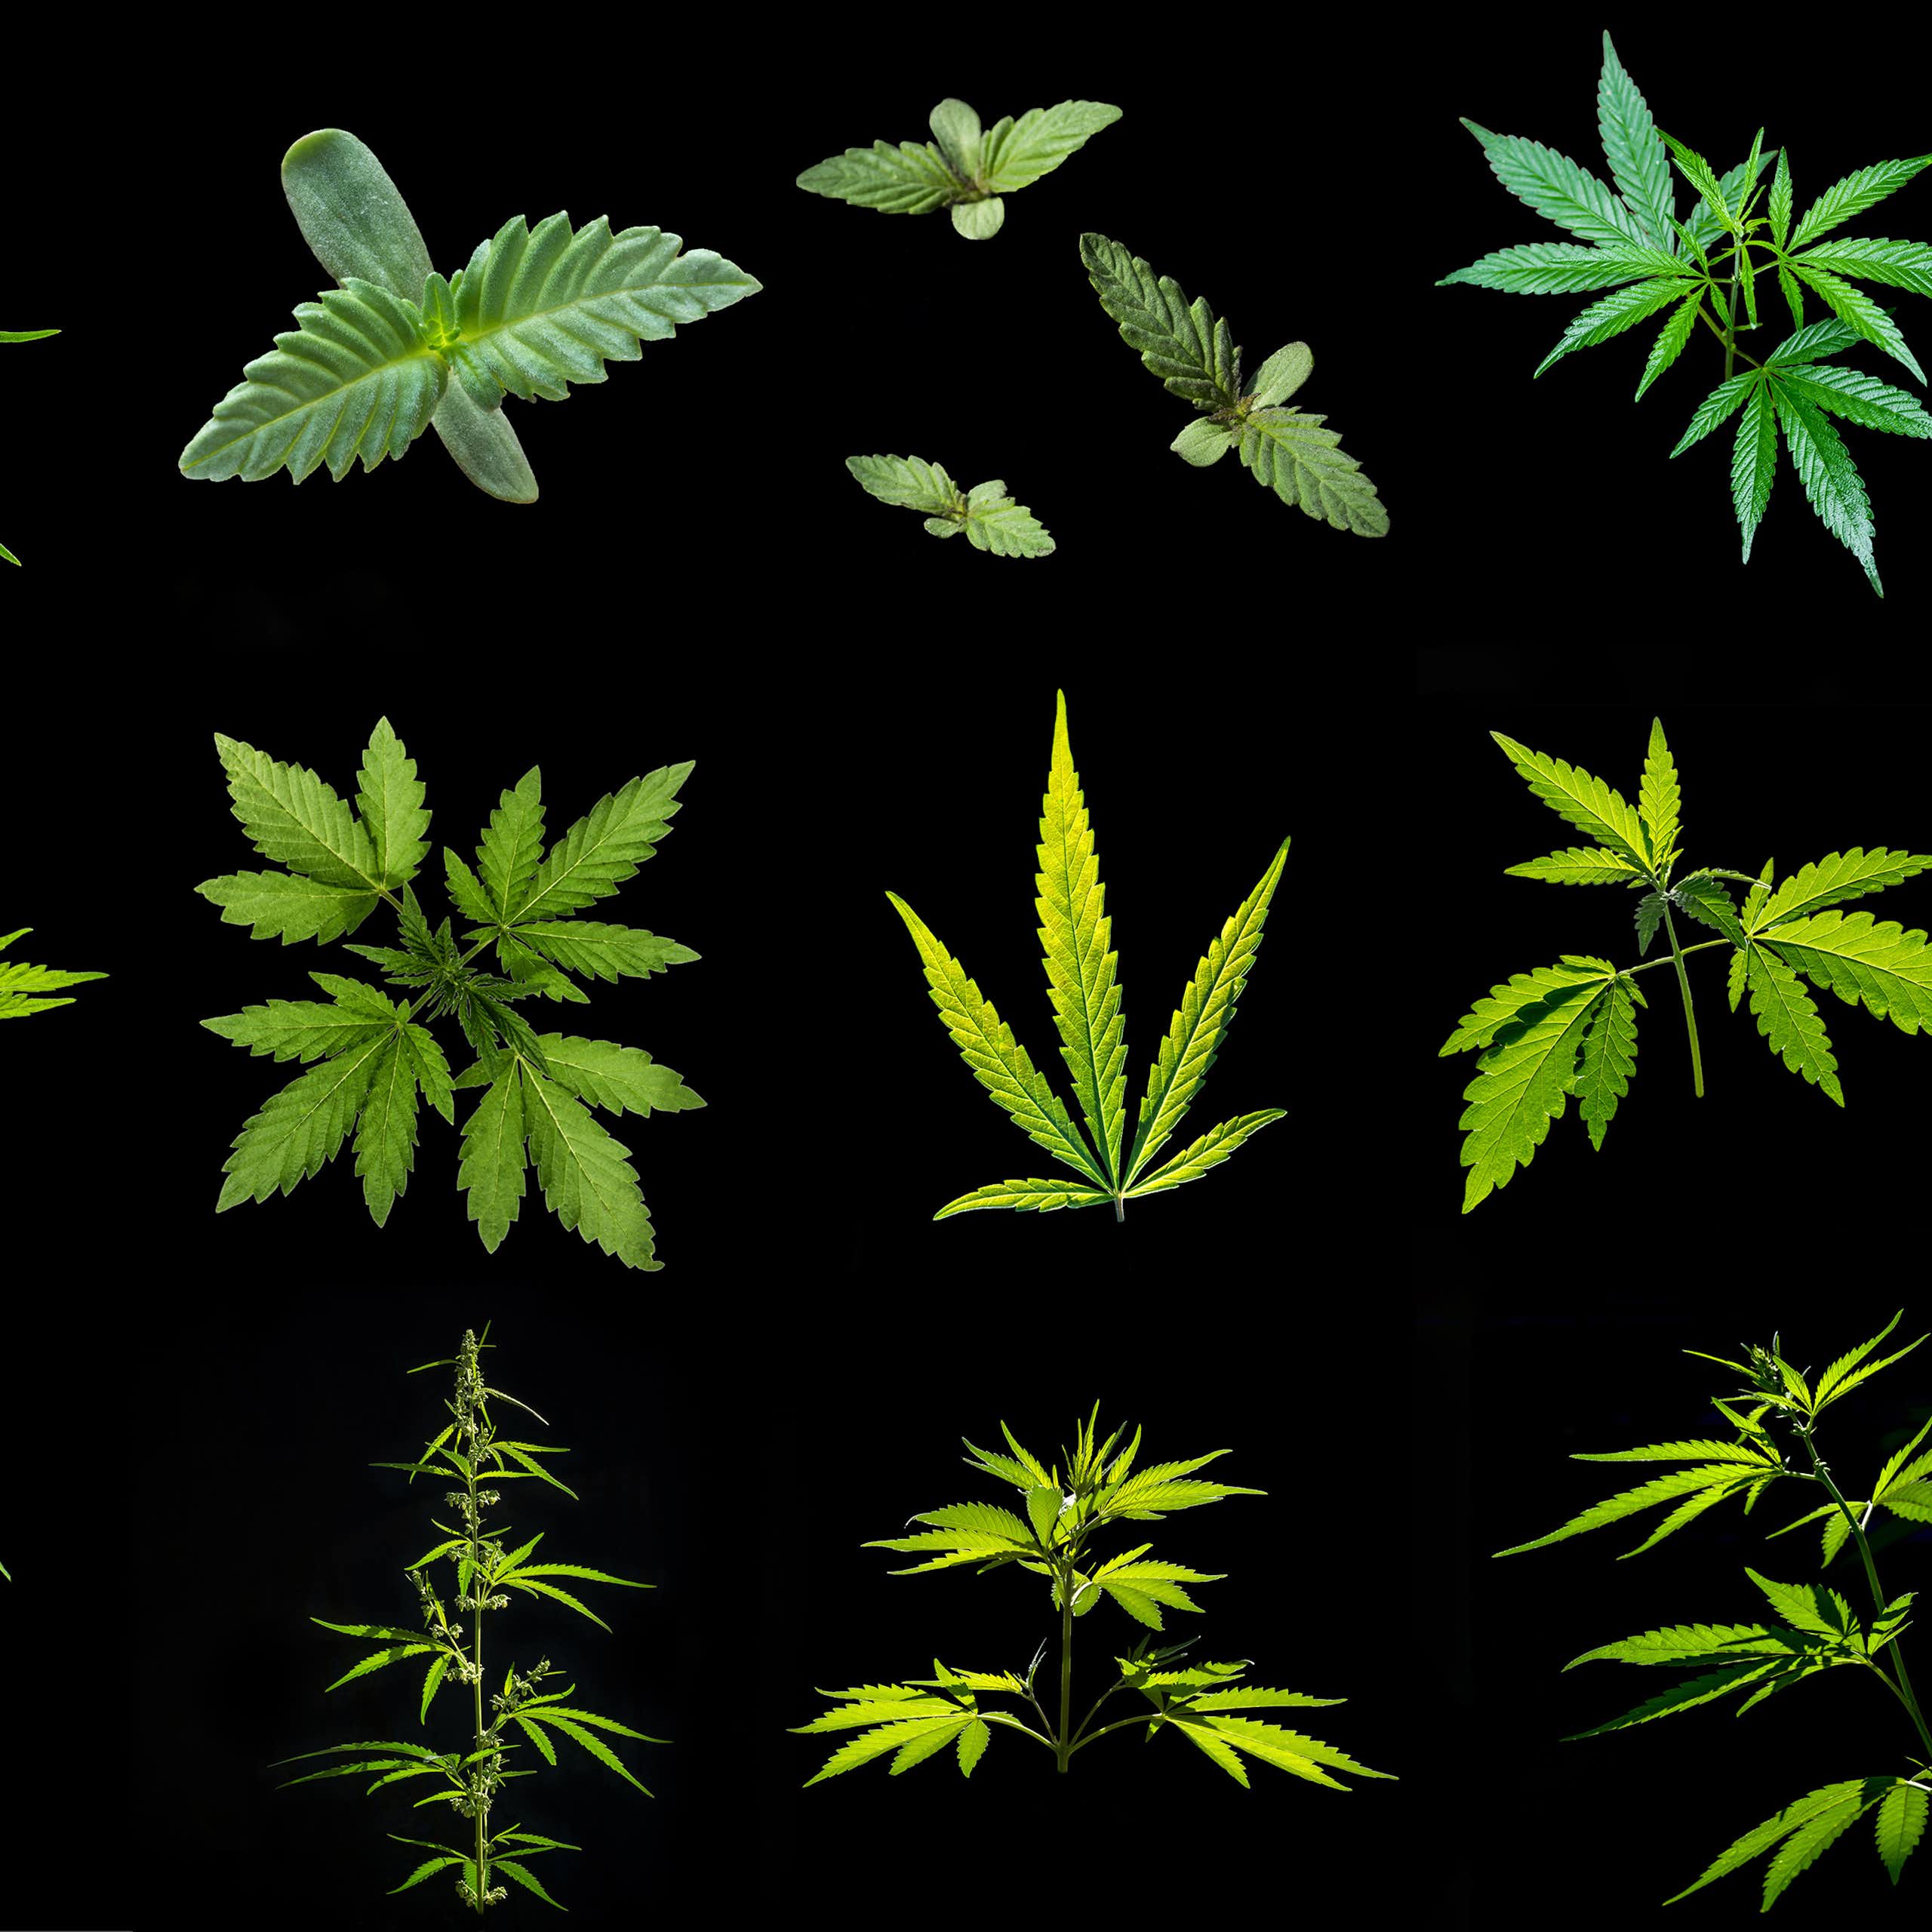 Variety of cannabis leaf types on a black background.